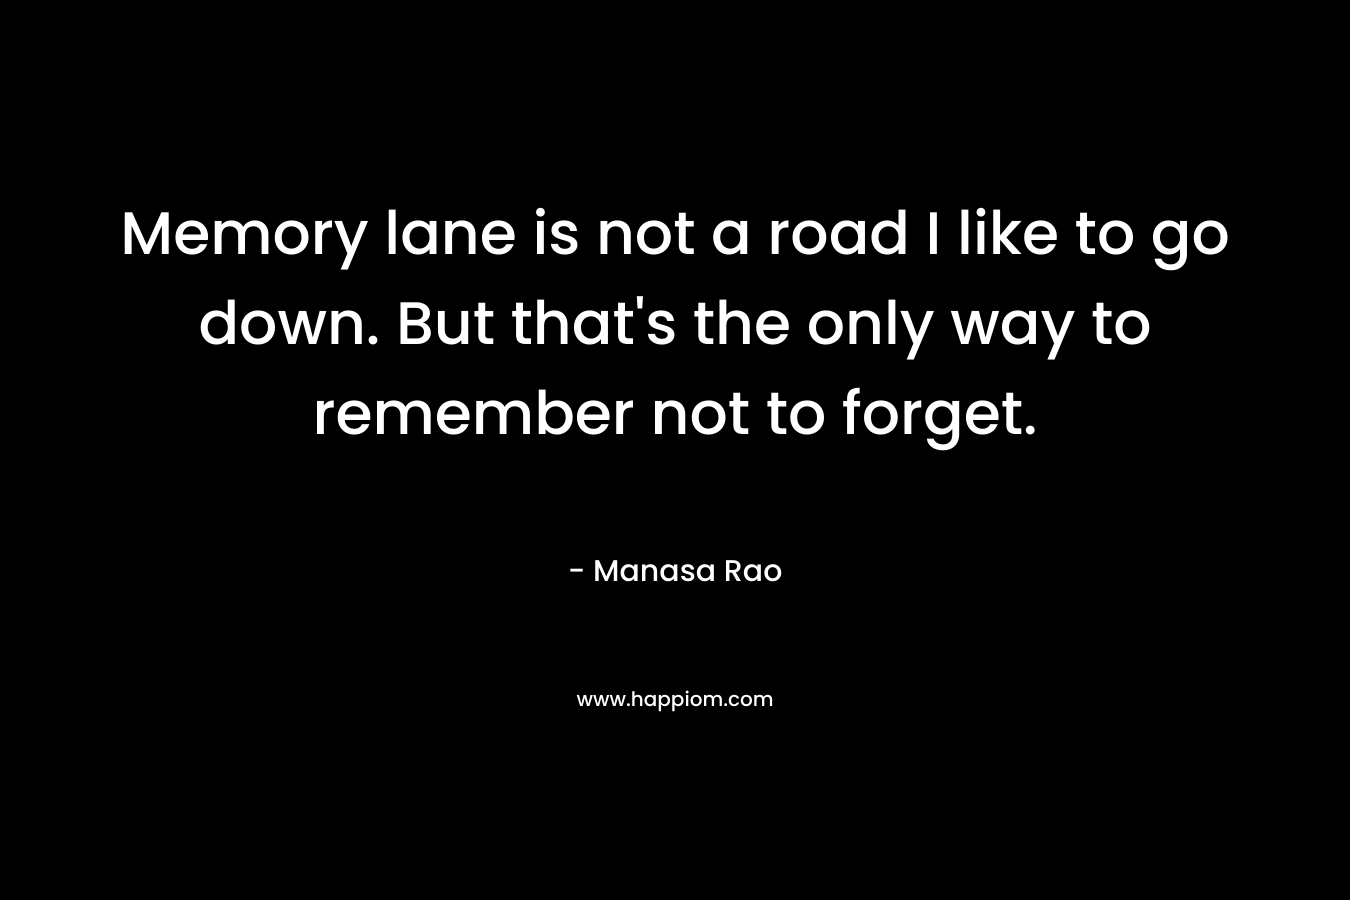 Memory lane is not a road I like to go down. But that’s the only way to remember not to forget. – Manasa Rao